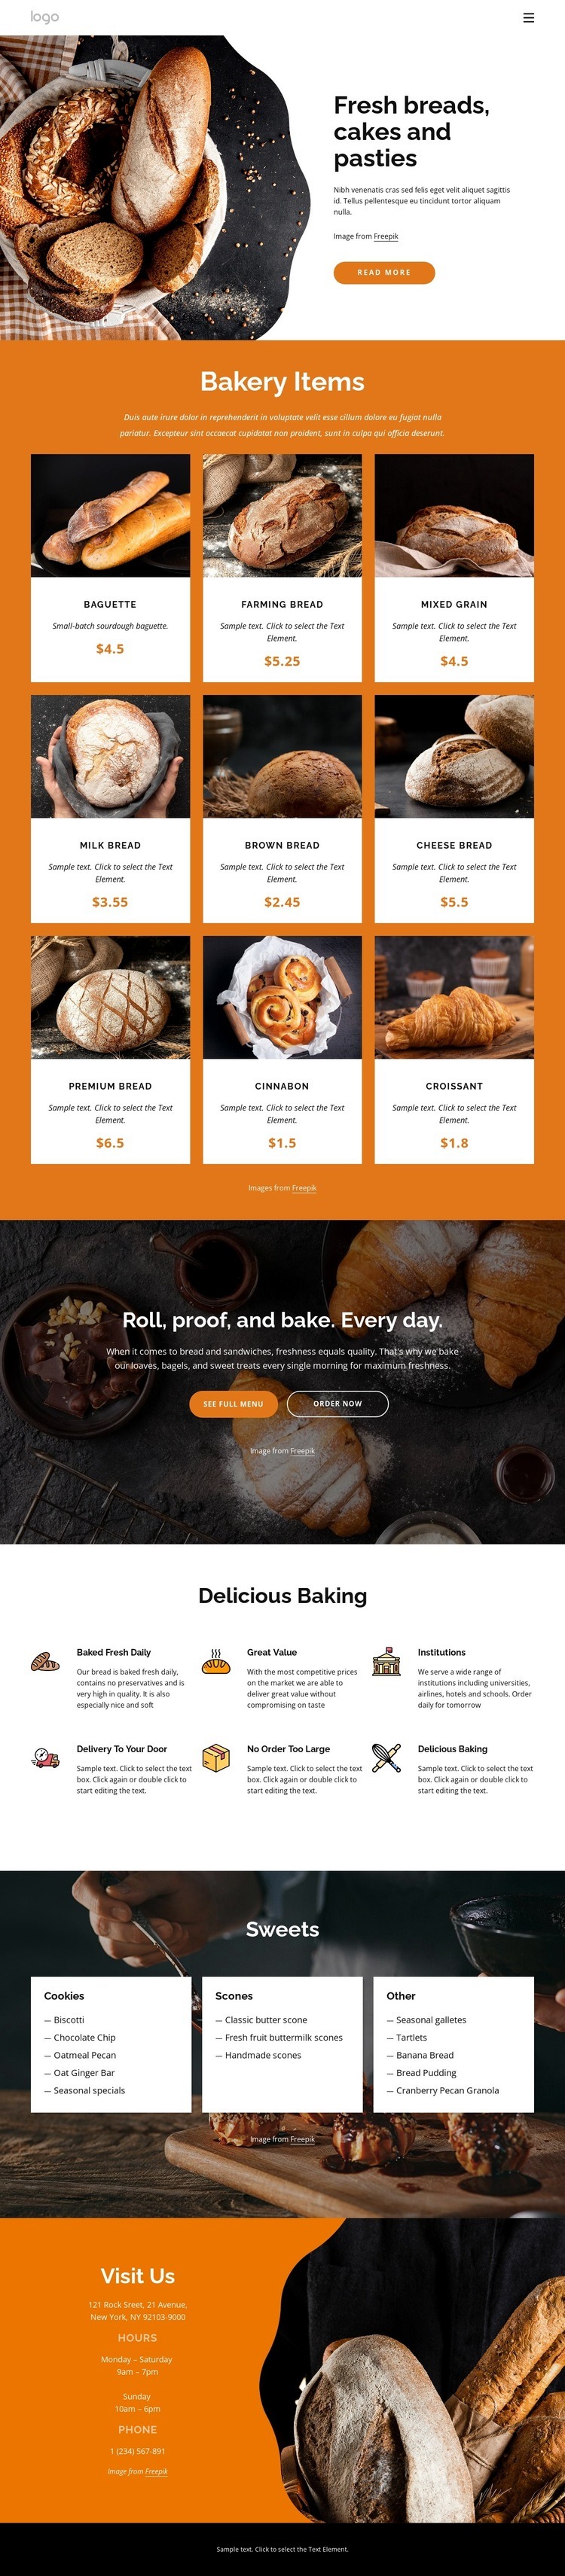 Fresh breads and cakes Webflow Template Alternative